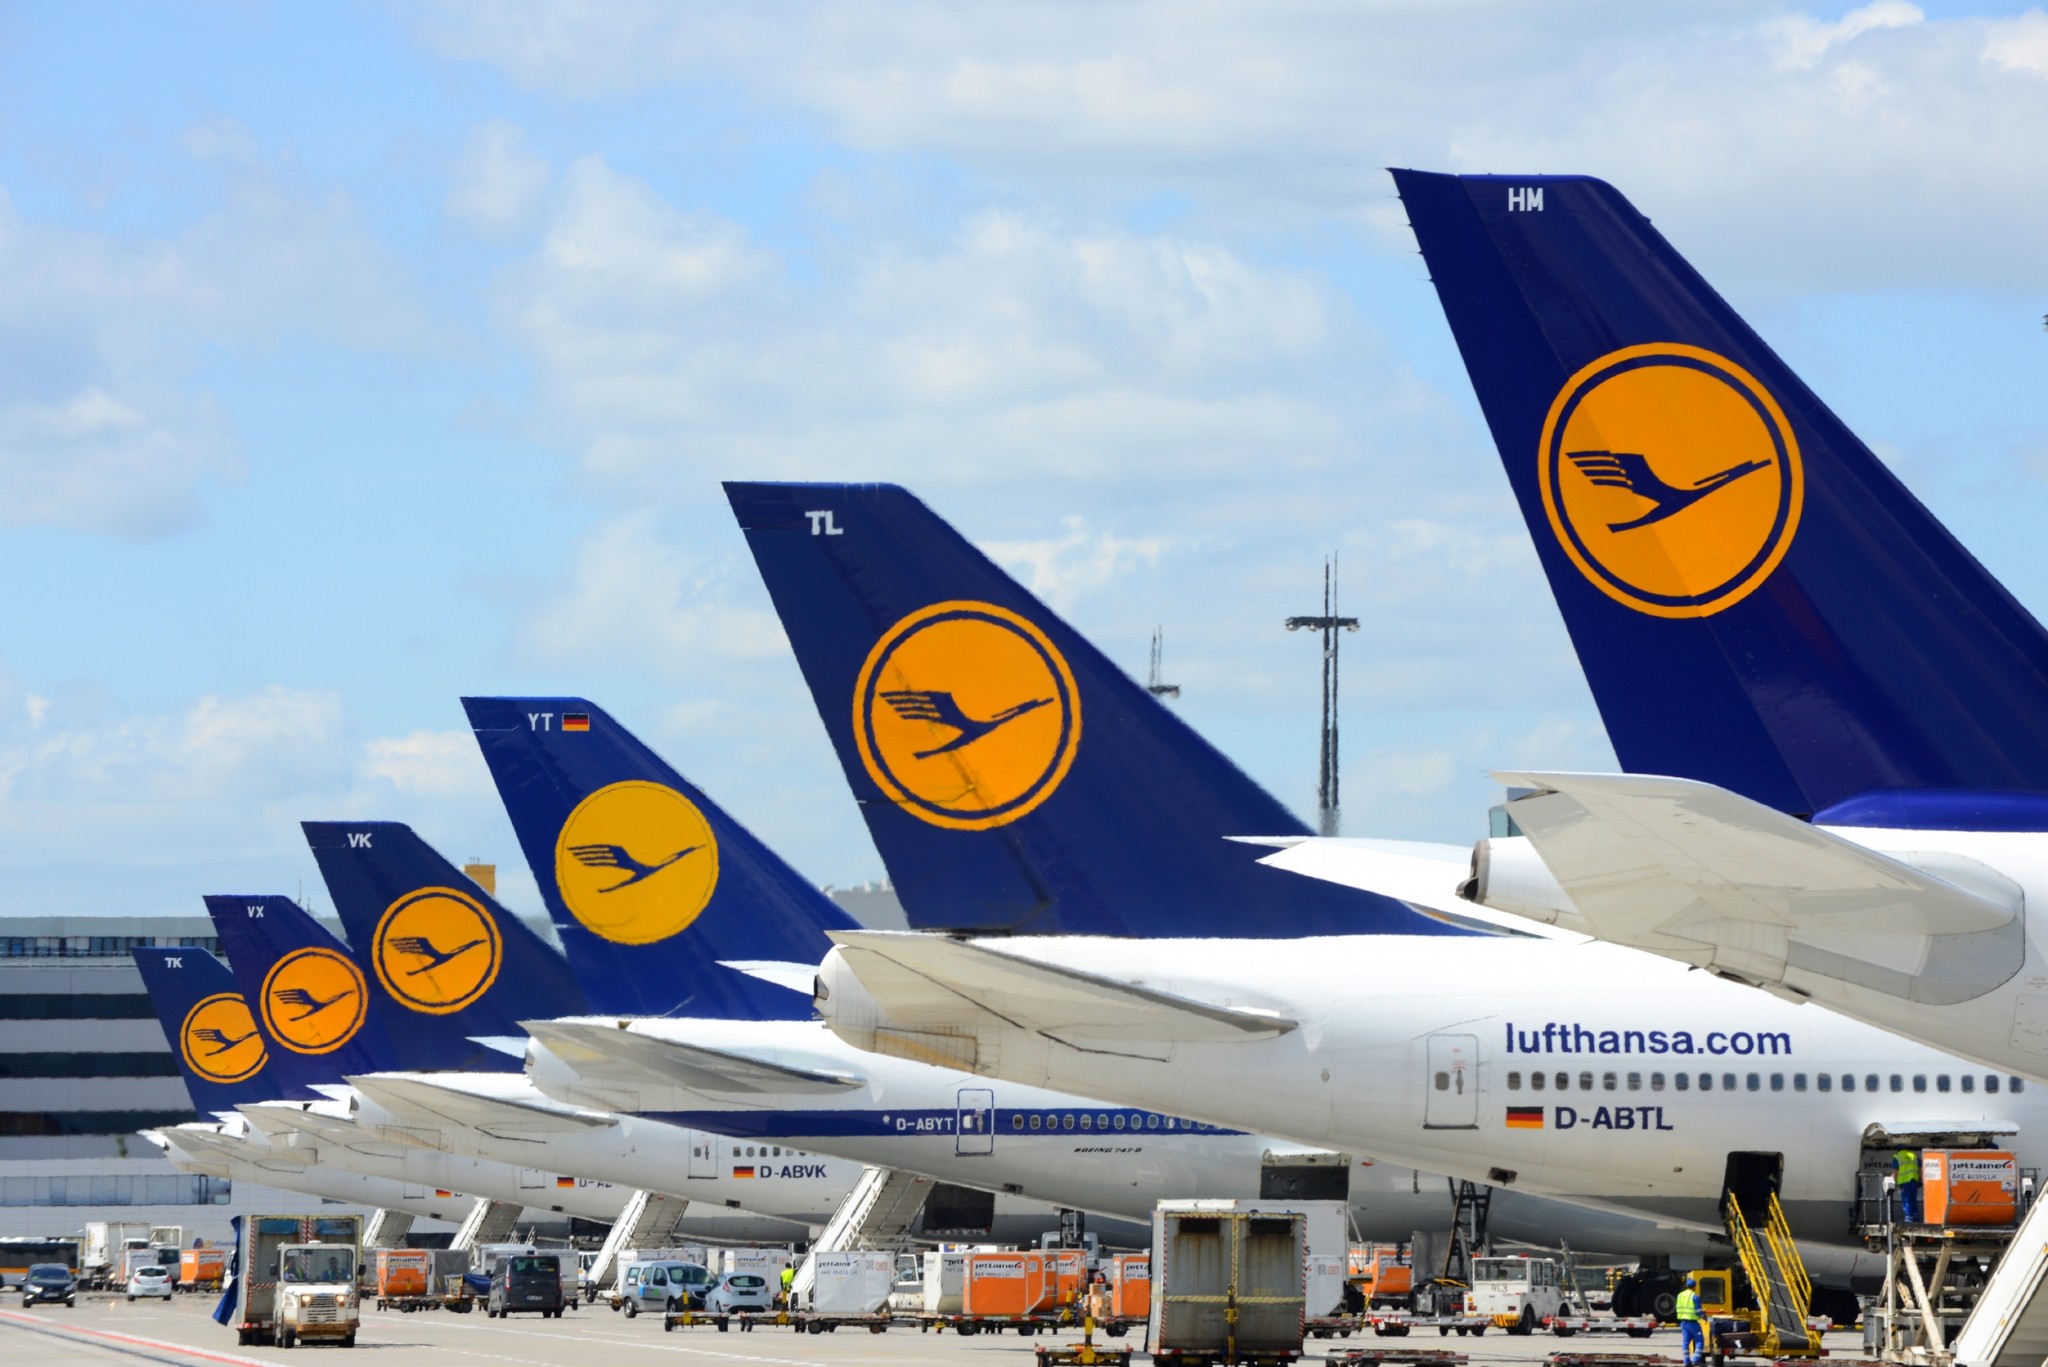 Lufthansa is expanding its European network this winter